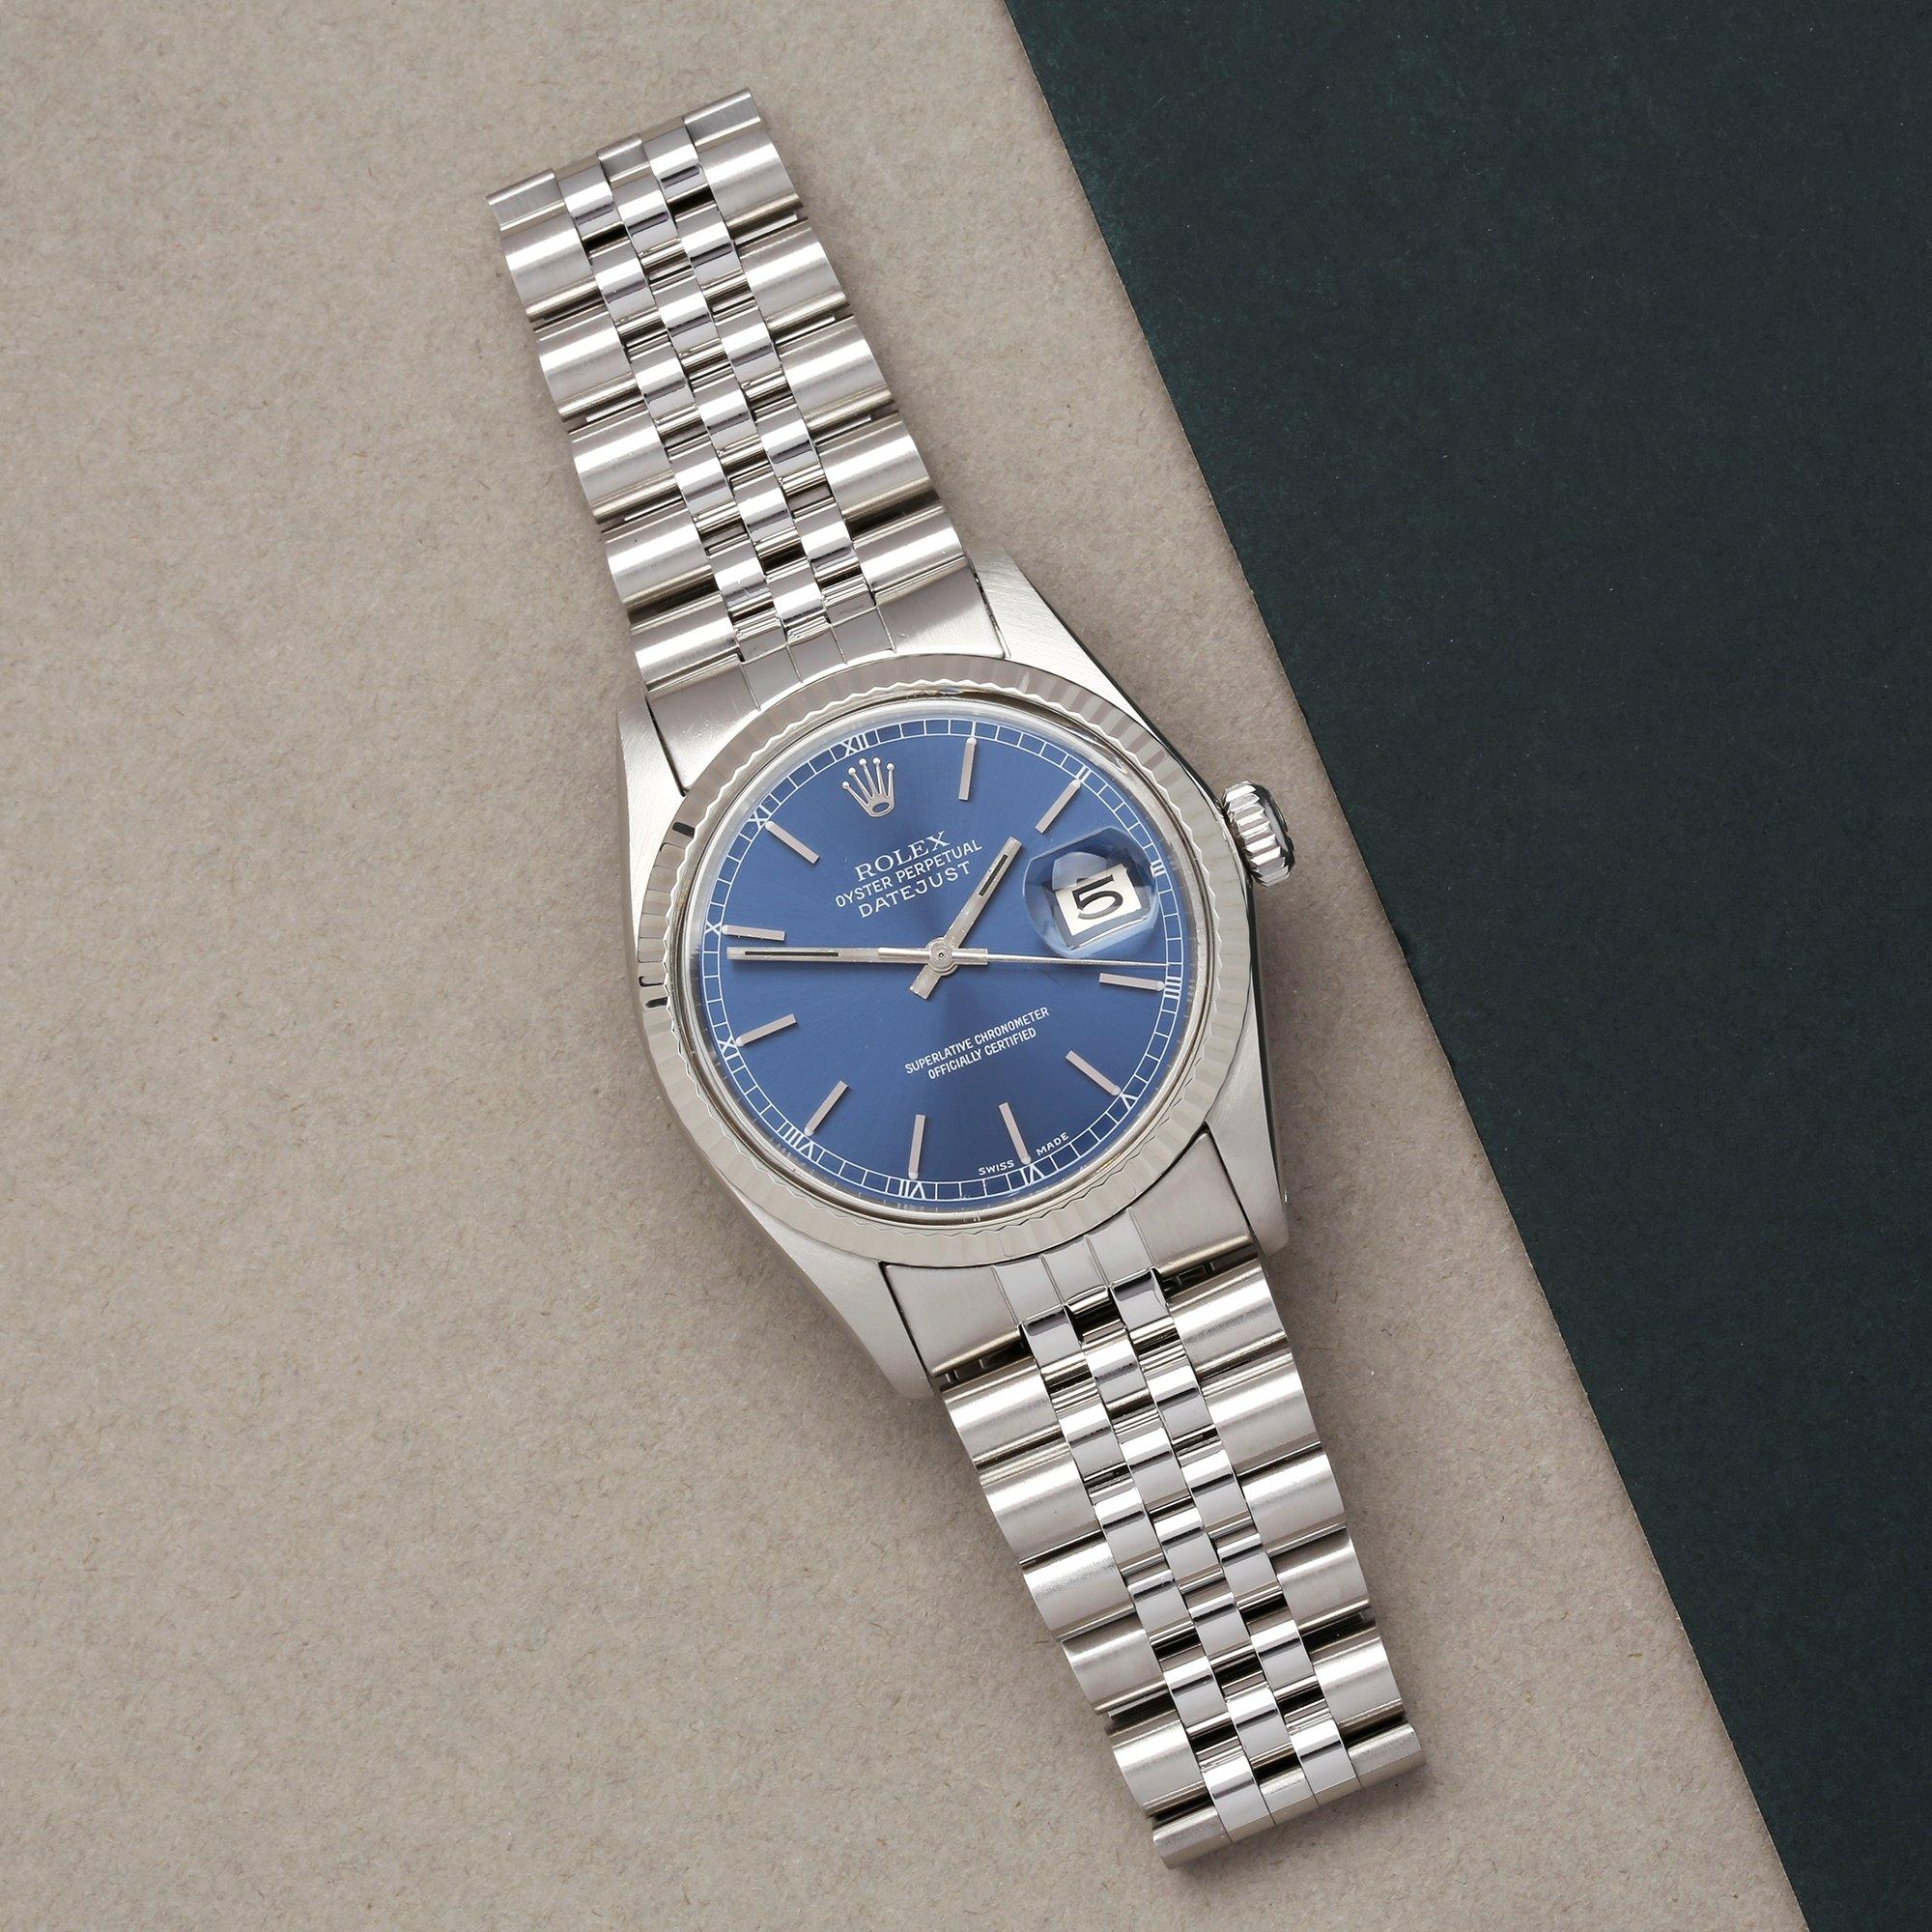 Xupes Reference: W007829
Manufacturer: Rolex
Model: Datejust
Model Variant: 36
Model Number: 16014
Age: 1979
Gender: Men
Complete With: Rolex Box 
Dial: Blue Baton 
Glass: Sapphire Crystal
Case Size: 36mm
Case Material: Stainless Steel & White